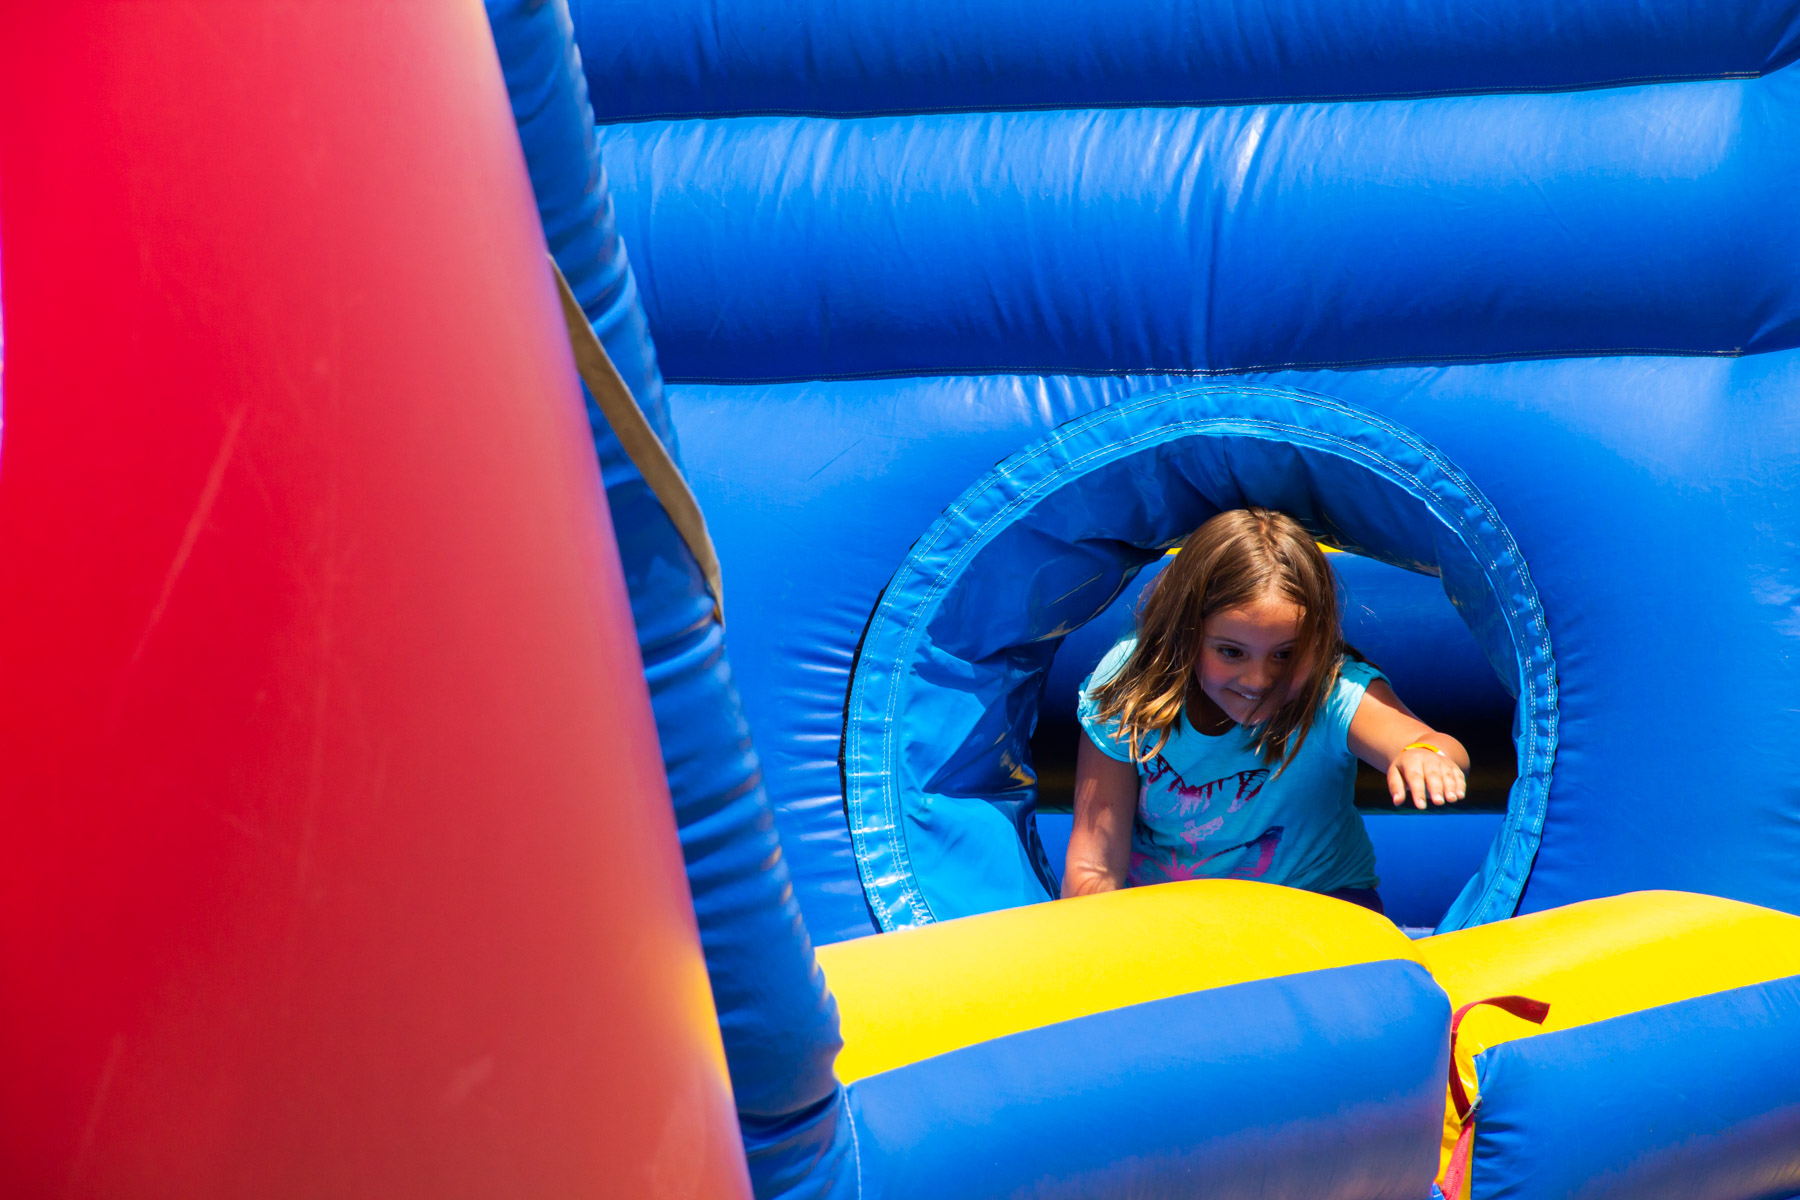 Girl climbing through inflatable obstacle course smiling and having fun.